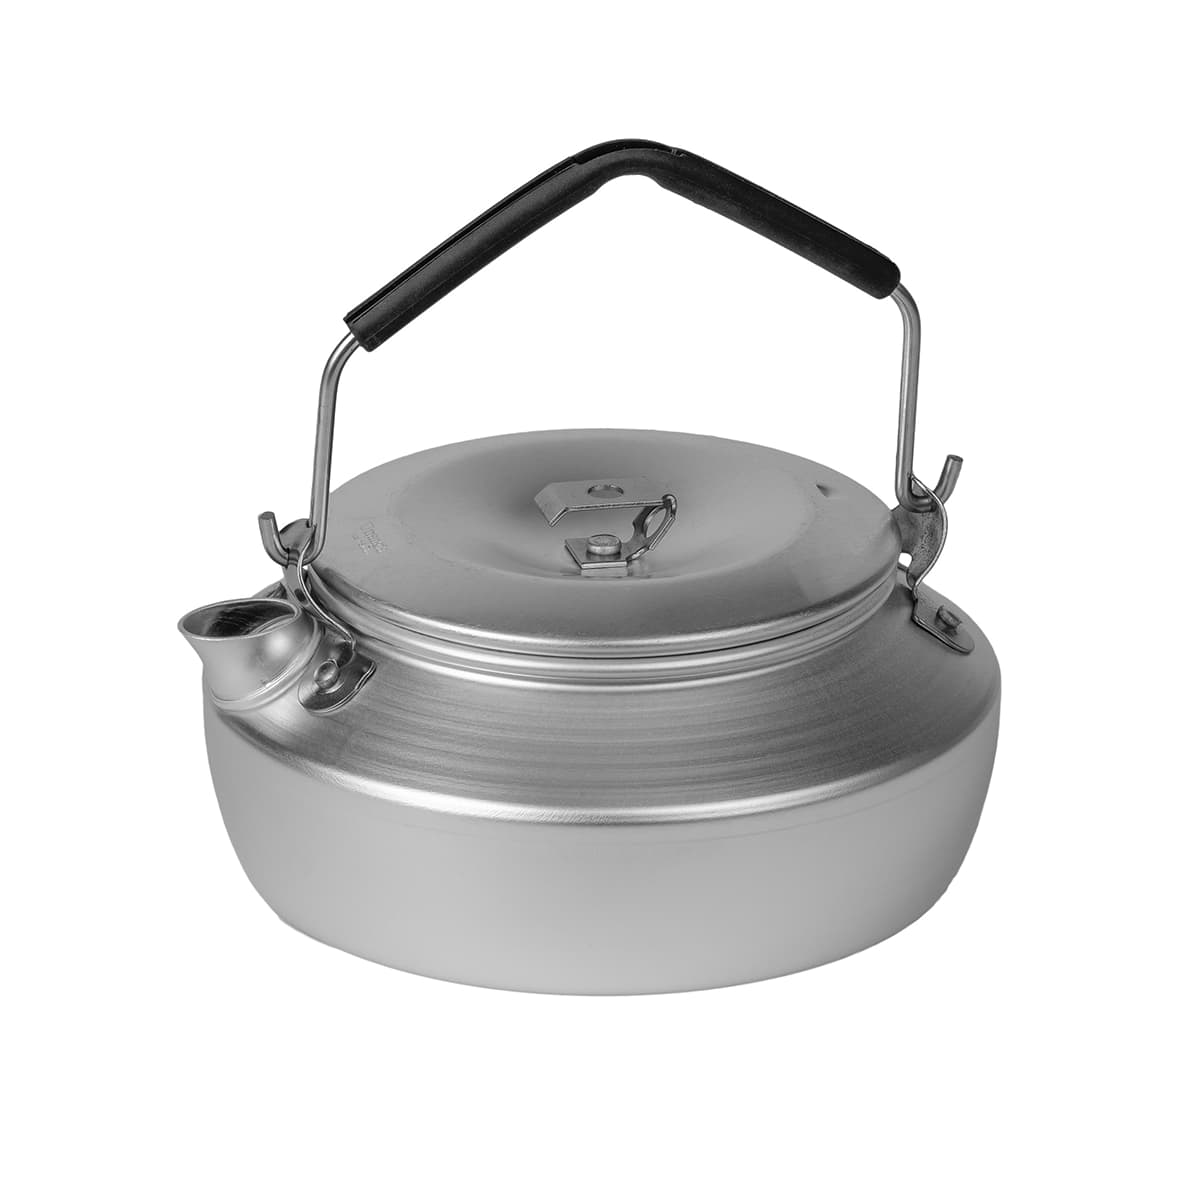 Trangia 0.6 L Aluminum Kettle with Stainless Steel Knob for 27 Series 